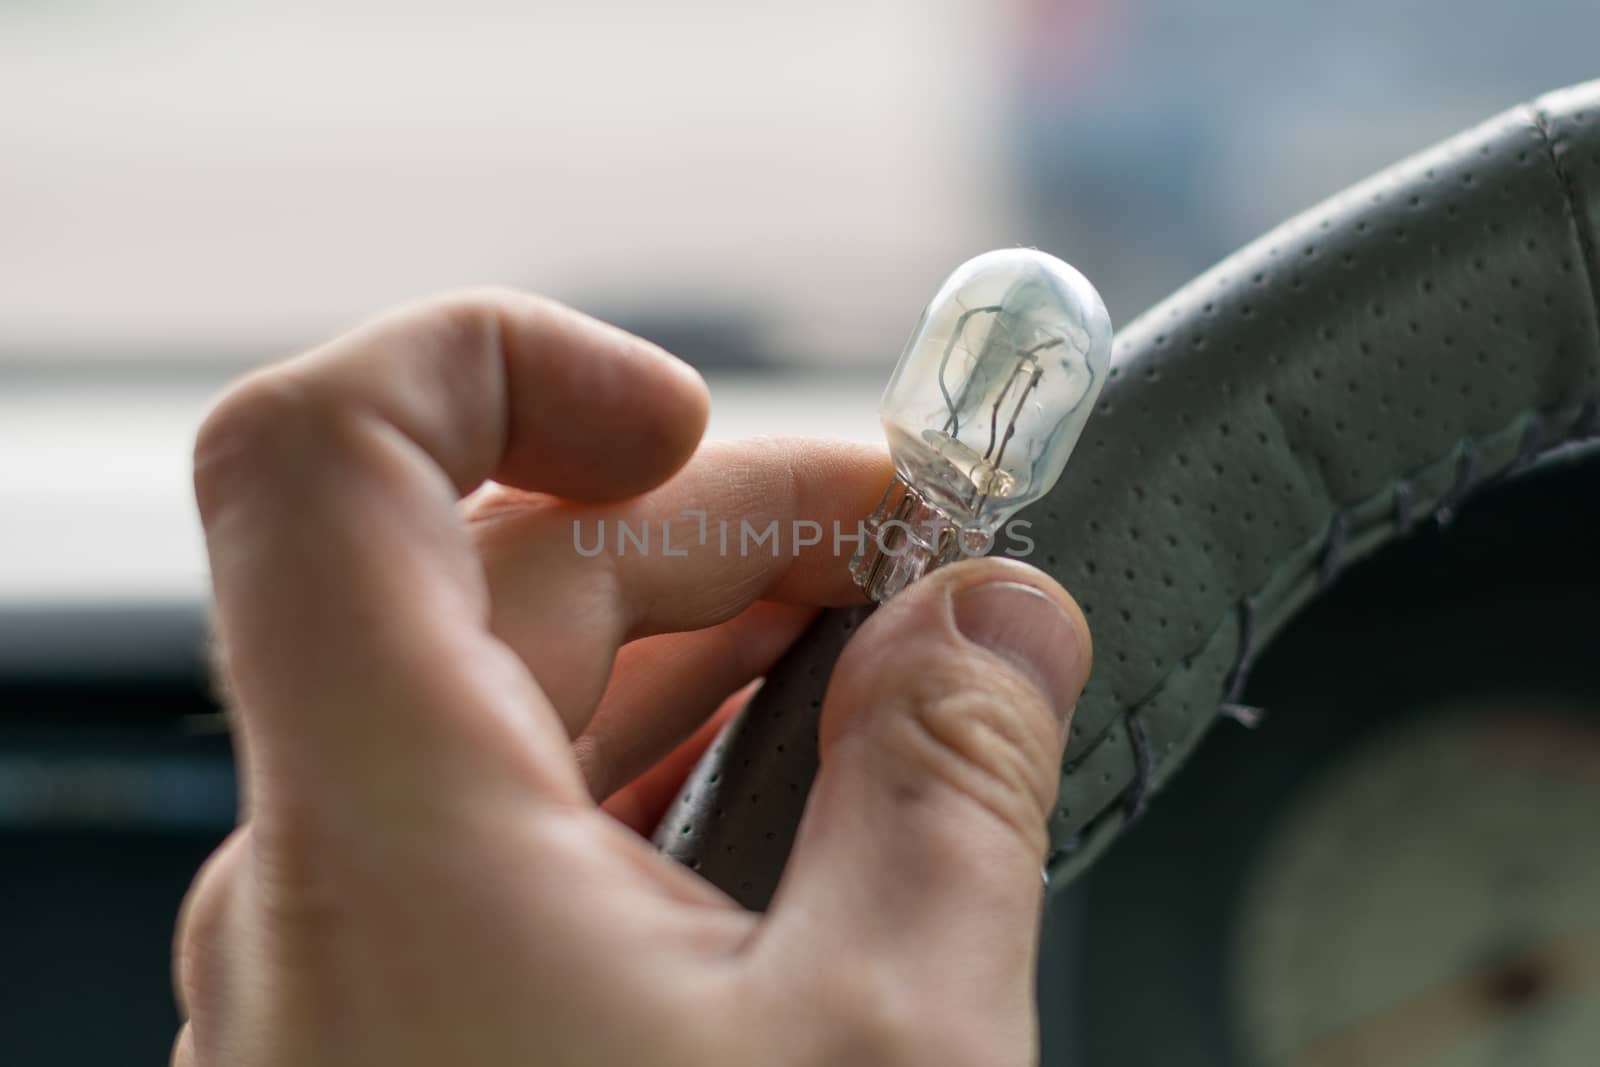 the fingers of the human hand hold the damaged light bulb in the car by jk3030